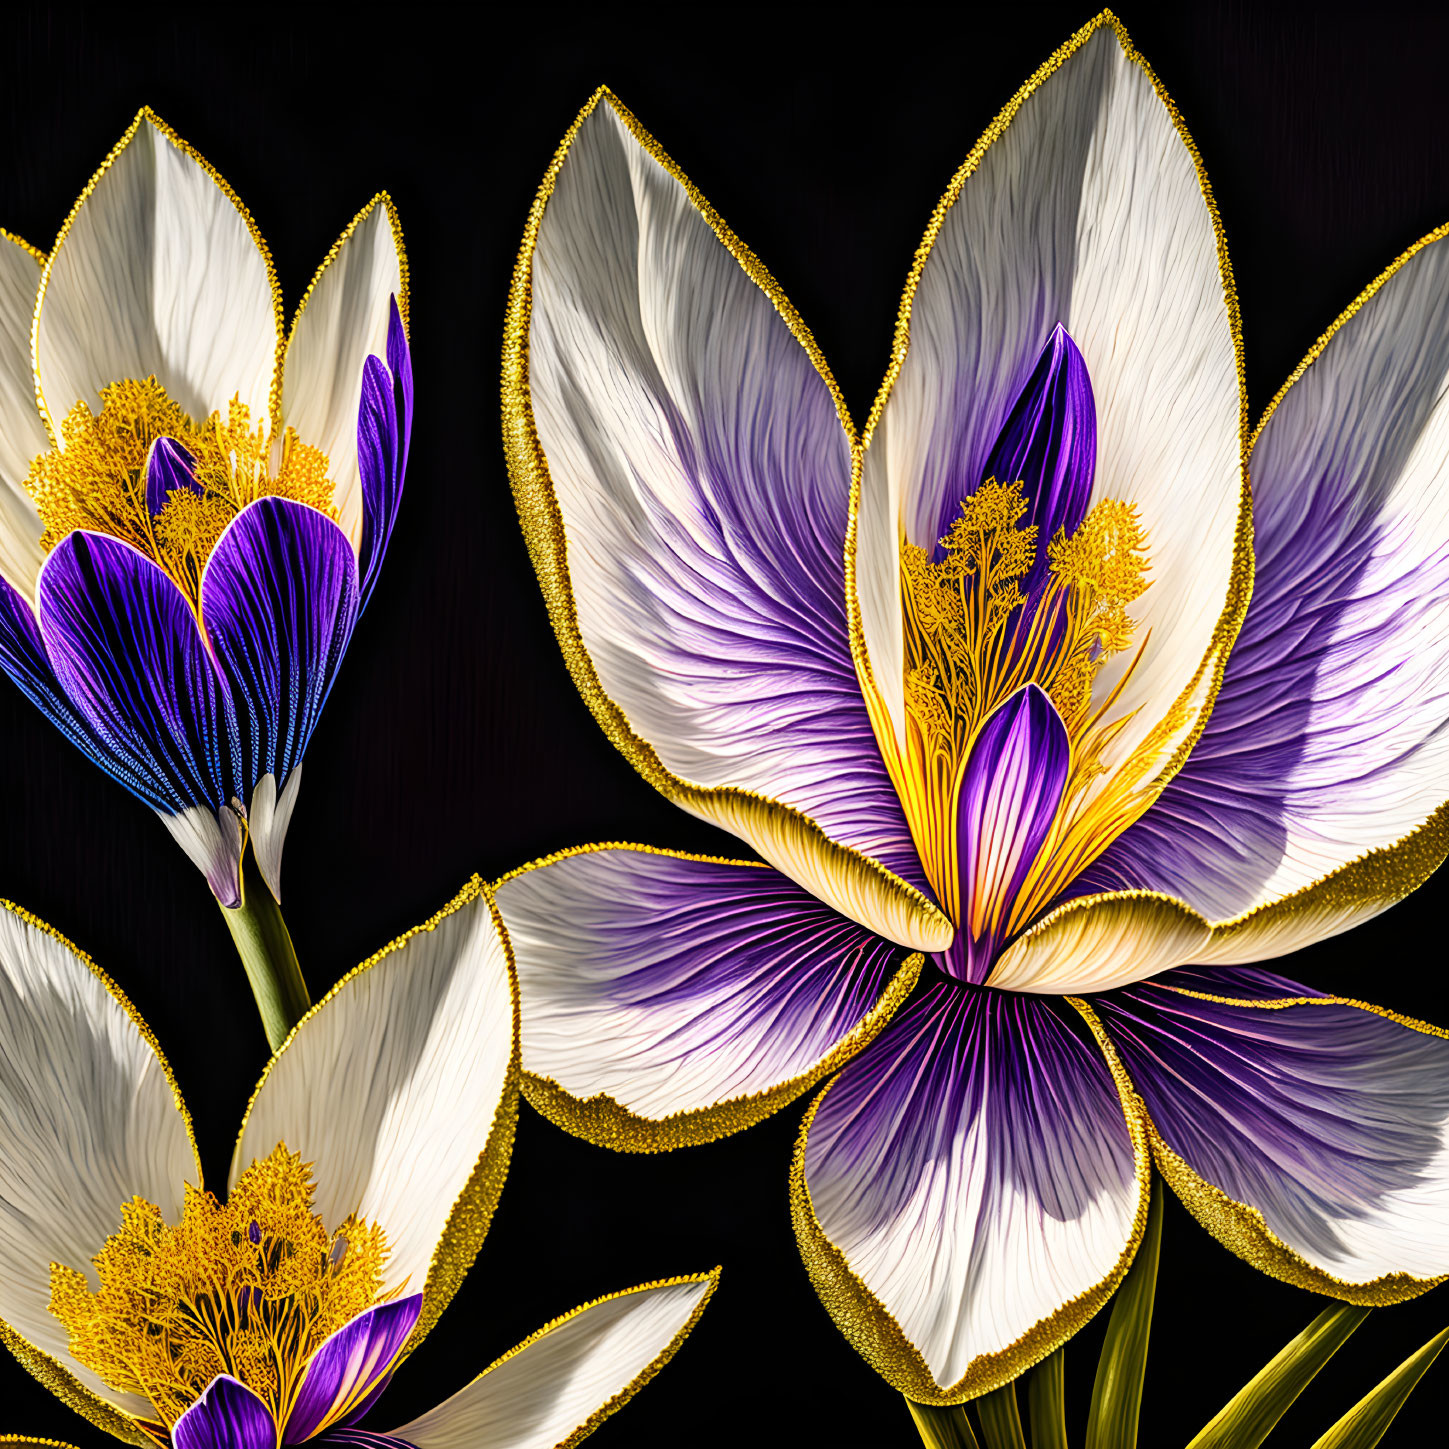 crocus blossoms, extremely detailed woodcut